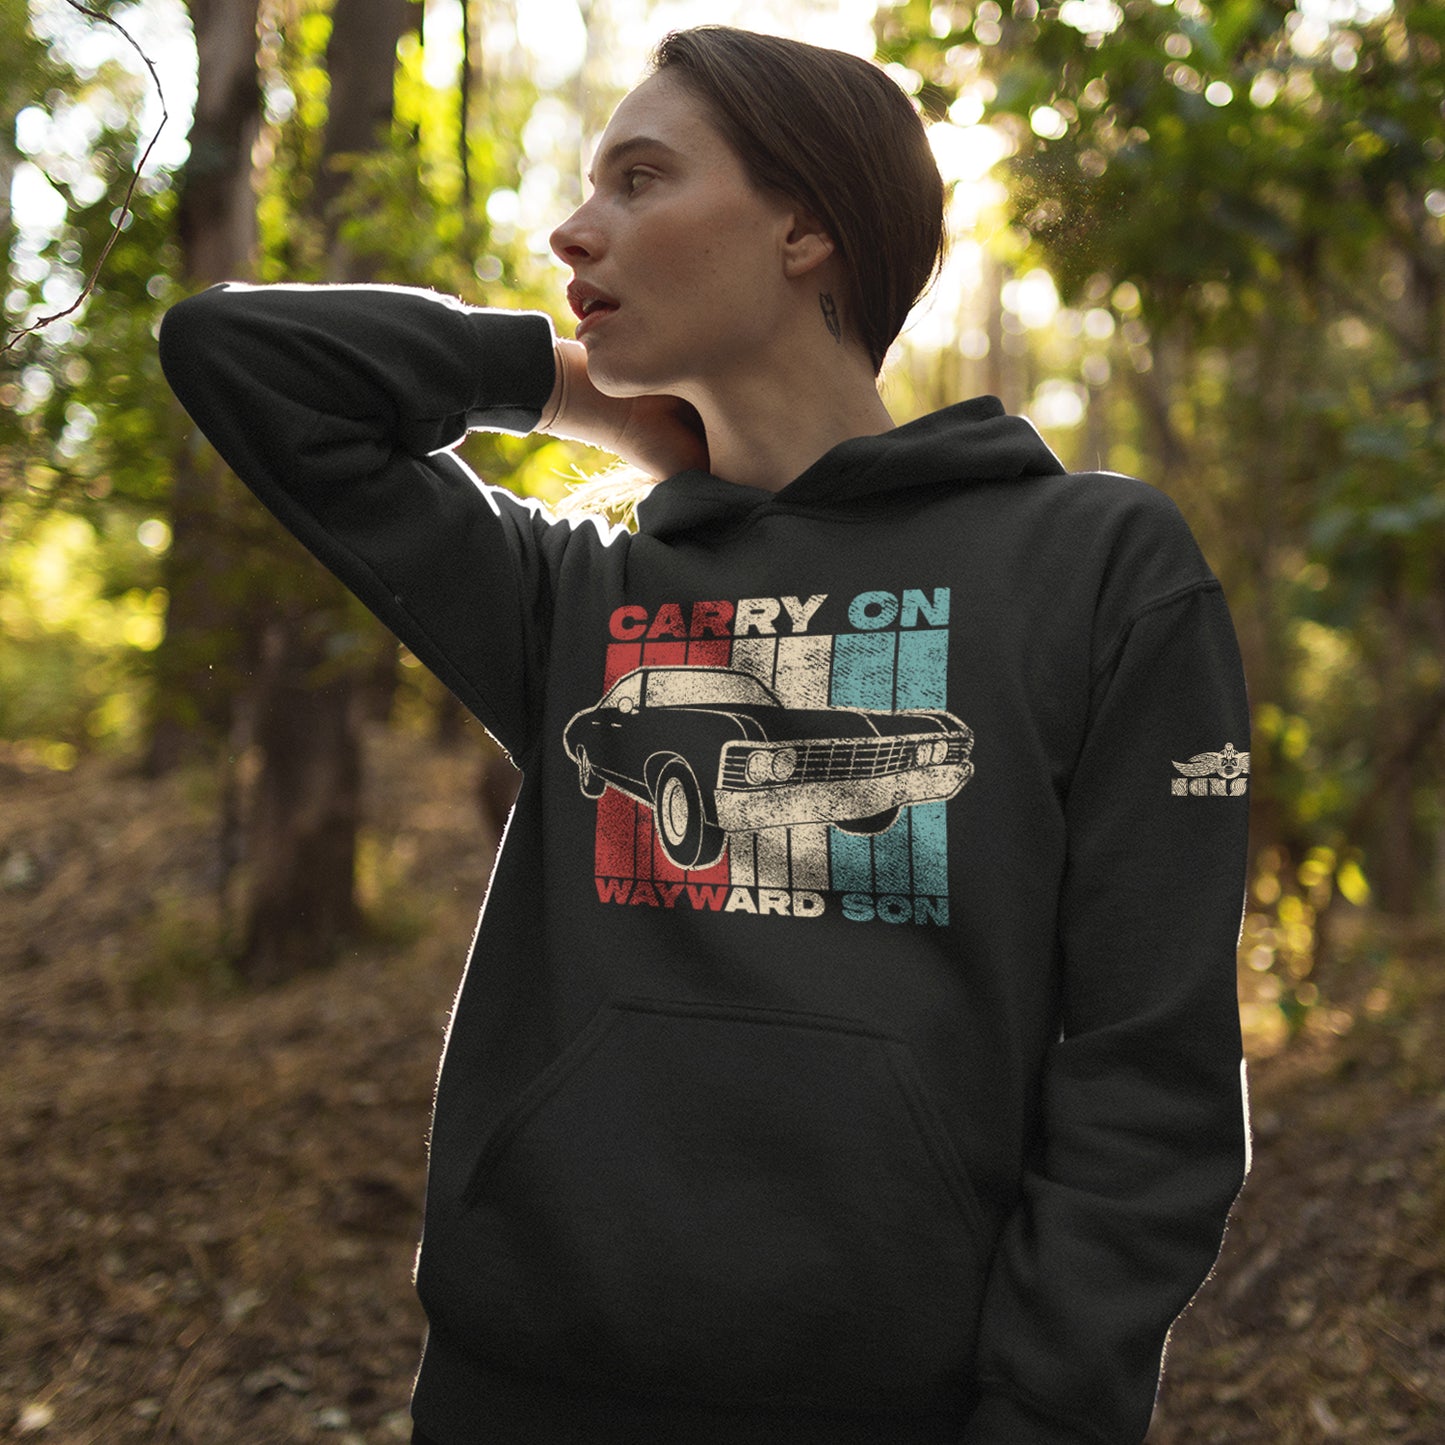 A female model standing in a forest and wearing a black hoodie. The hoodie features a flag comprised of red, white, and, blue vertical stripes. On the top and bottom of the flag are the words "CARRY ON WAYWARD SON" in the synced colored of the flag. A 1967 Impala is overlaid on top of the flag. On the left bicep is a small white Kansas Band logo.  